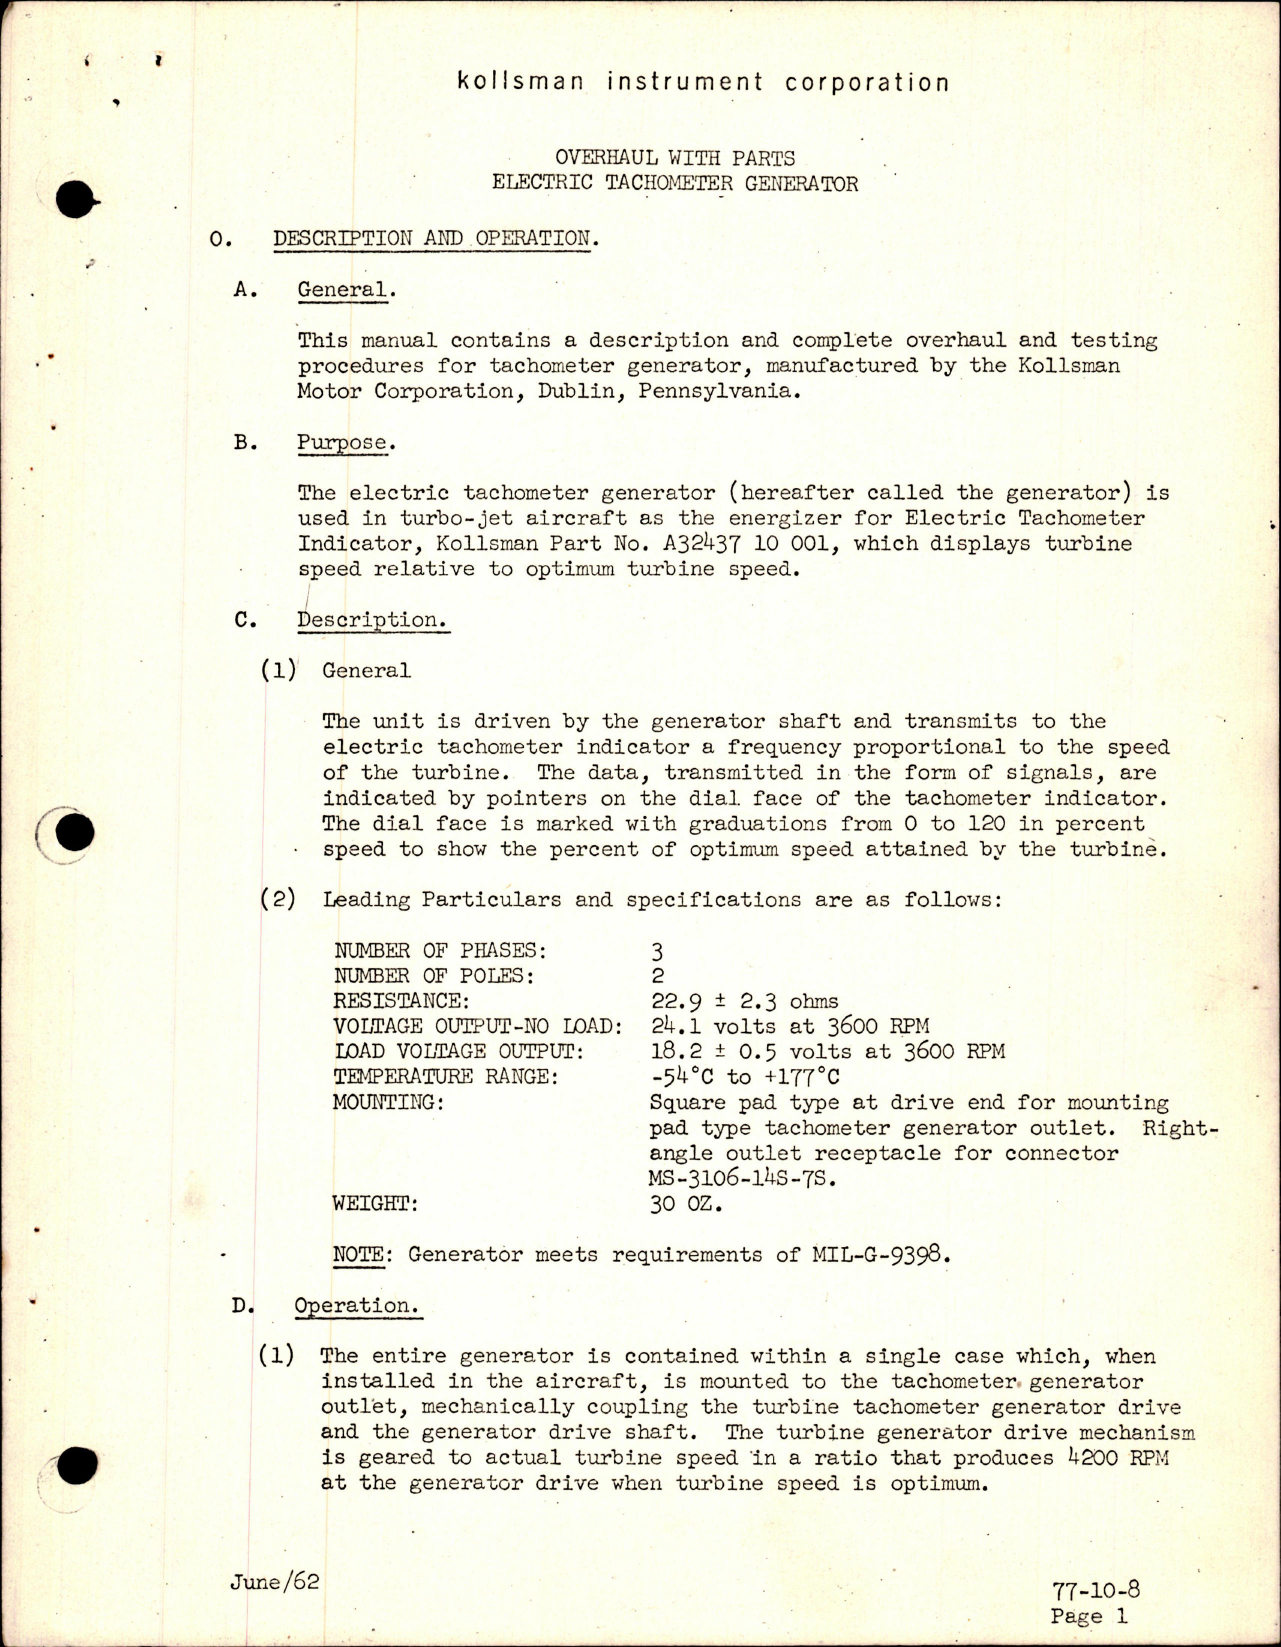 Sample page 5 from AirCorps Library document: Overhaul Instructions with Parts for Electric Tachometer Generator - Parts A28071 11 302 and C28071 11 302